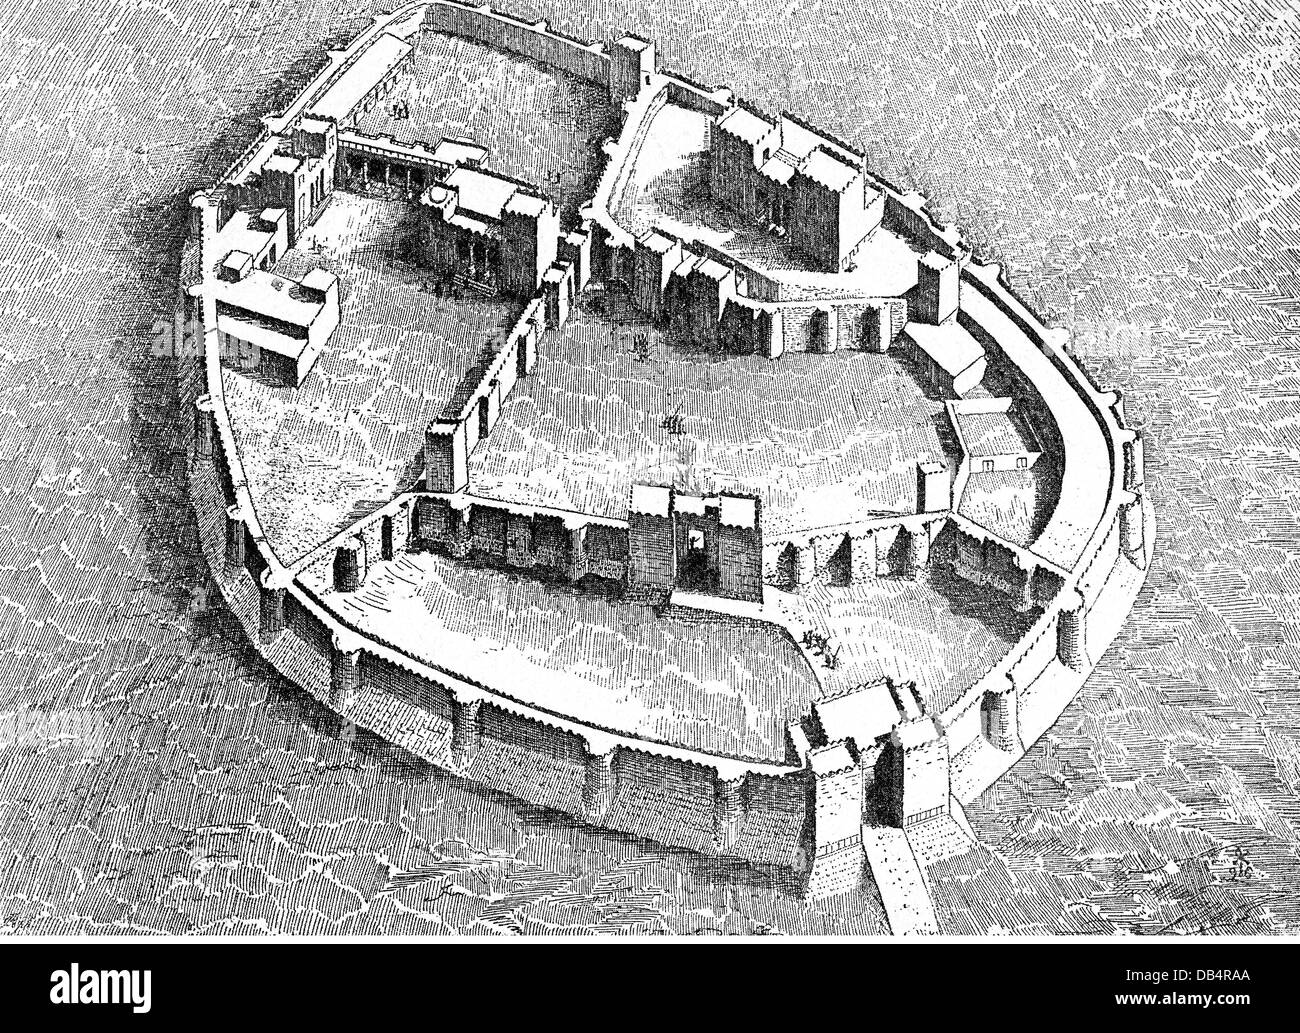 military, fortresses, Aramaean castle of Sam'al, North Syria, 9th century BC, reconstruction, wood engraving, 19th century, wall, walls, towers, Syria, Arameans, Aramaeans, Aramean, rampart, ramparts, castles, castle, Samal, Bit Gabbar, Ja'udi, Jaudi, fortress, fortresses, historic, historical, ancient world, Additional-Rights-Clearences-Not Available Stock Photo